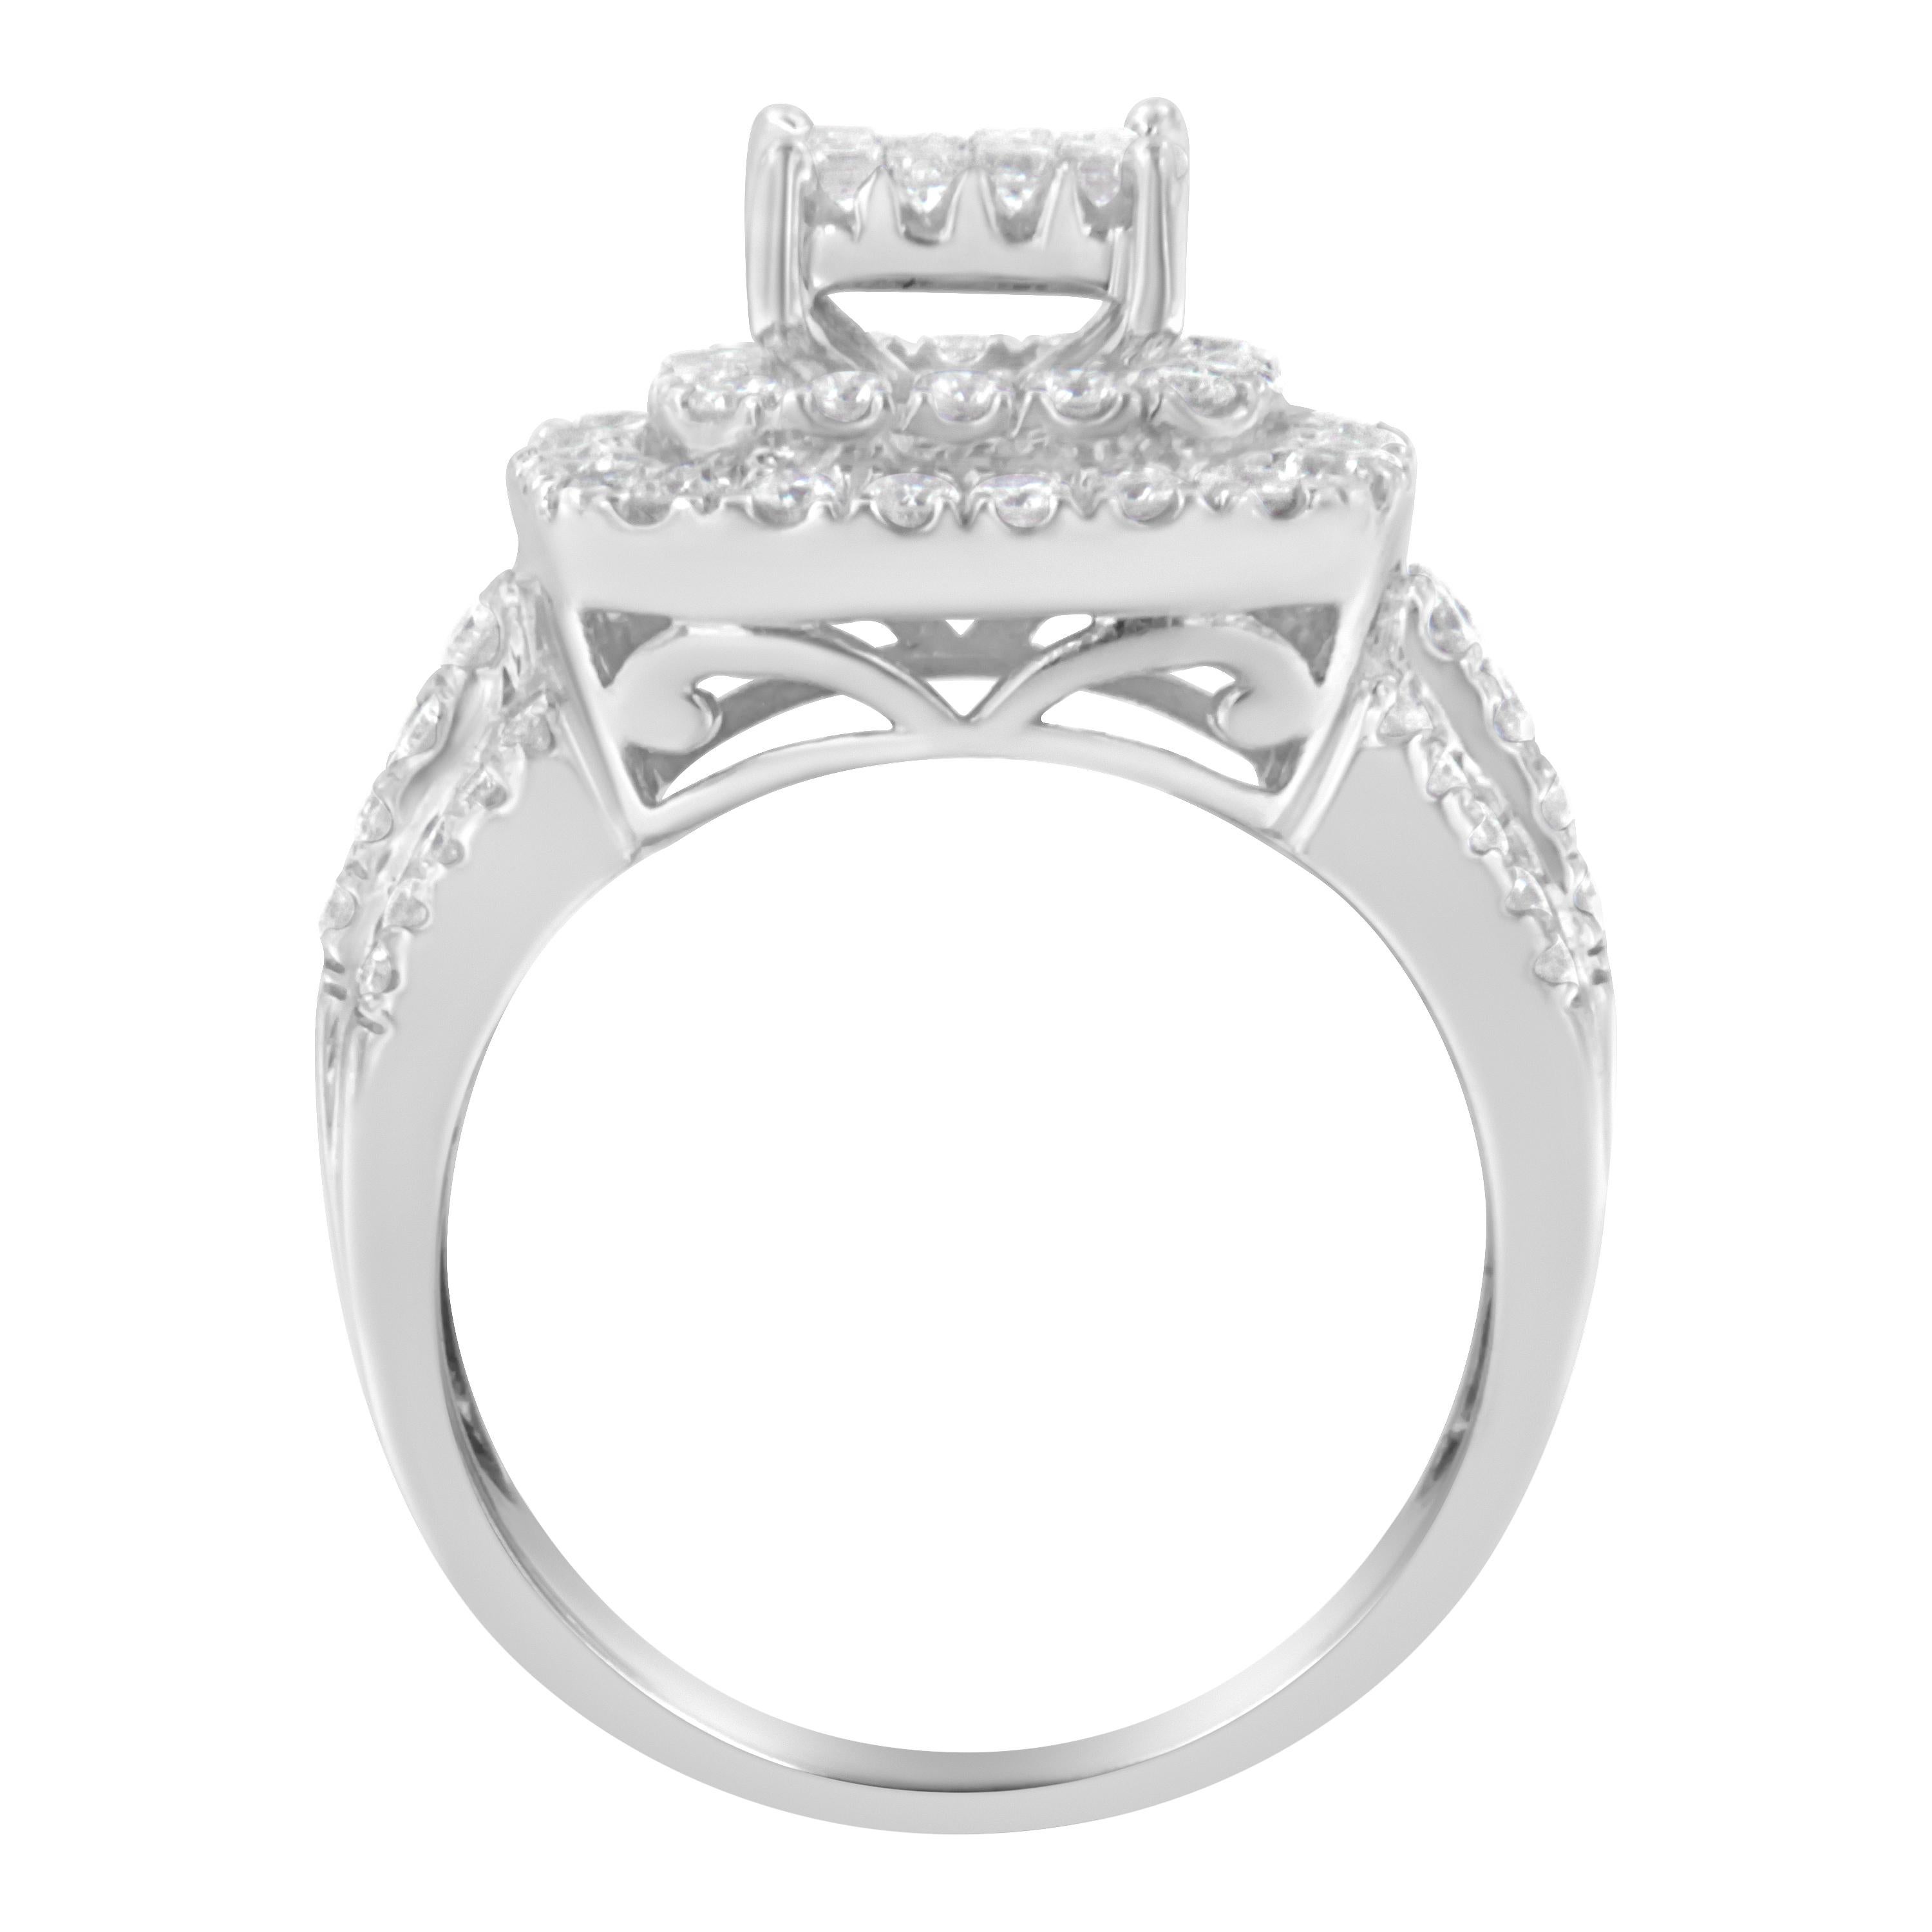 This diamond cocktail ring sparkles with a central square cluster of round diamonds surrounded by a double halo. The wide band is crafted in 14 karat white gold and has three rows of round diamonds. It has a total diamonds weight of 1 1/2 carats.